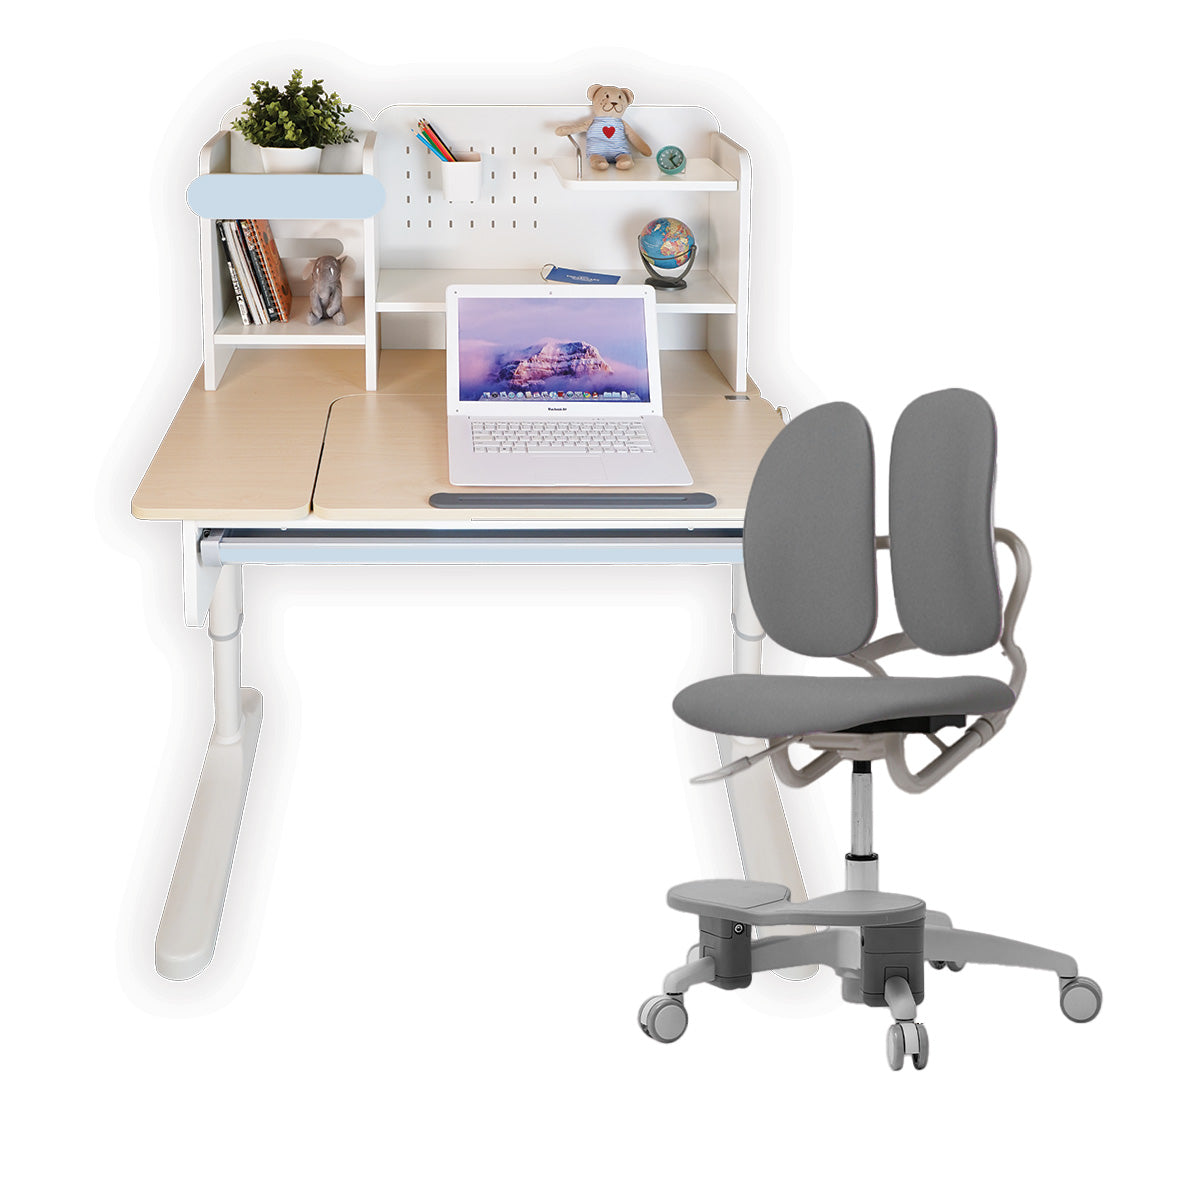 Impact Ergo-Growing Study Desk And Chair Set 1000mm x 650mm, IM-G1000A-BL (Ready Stocks)